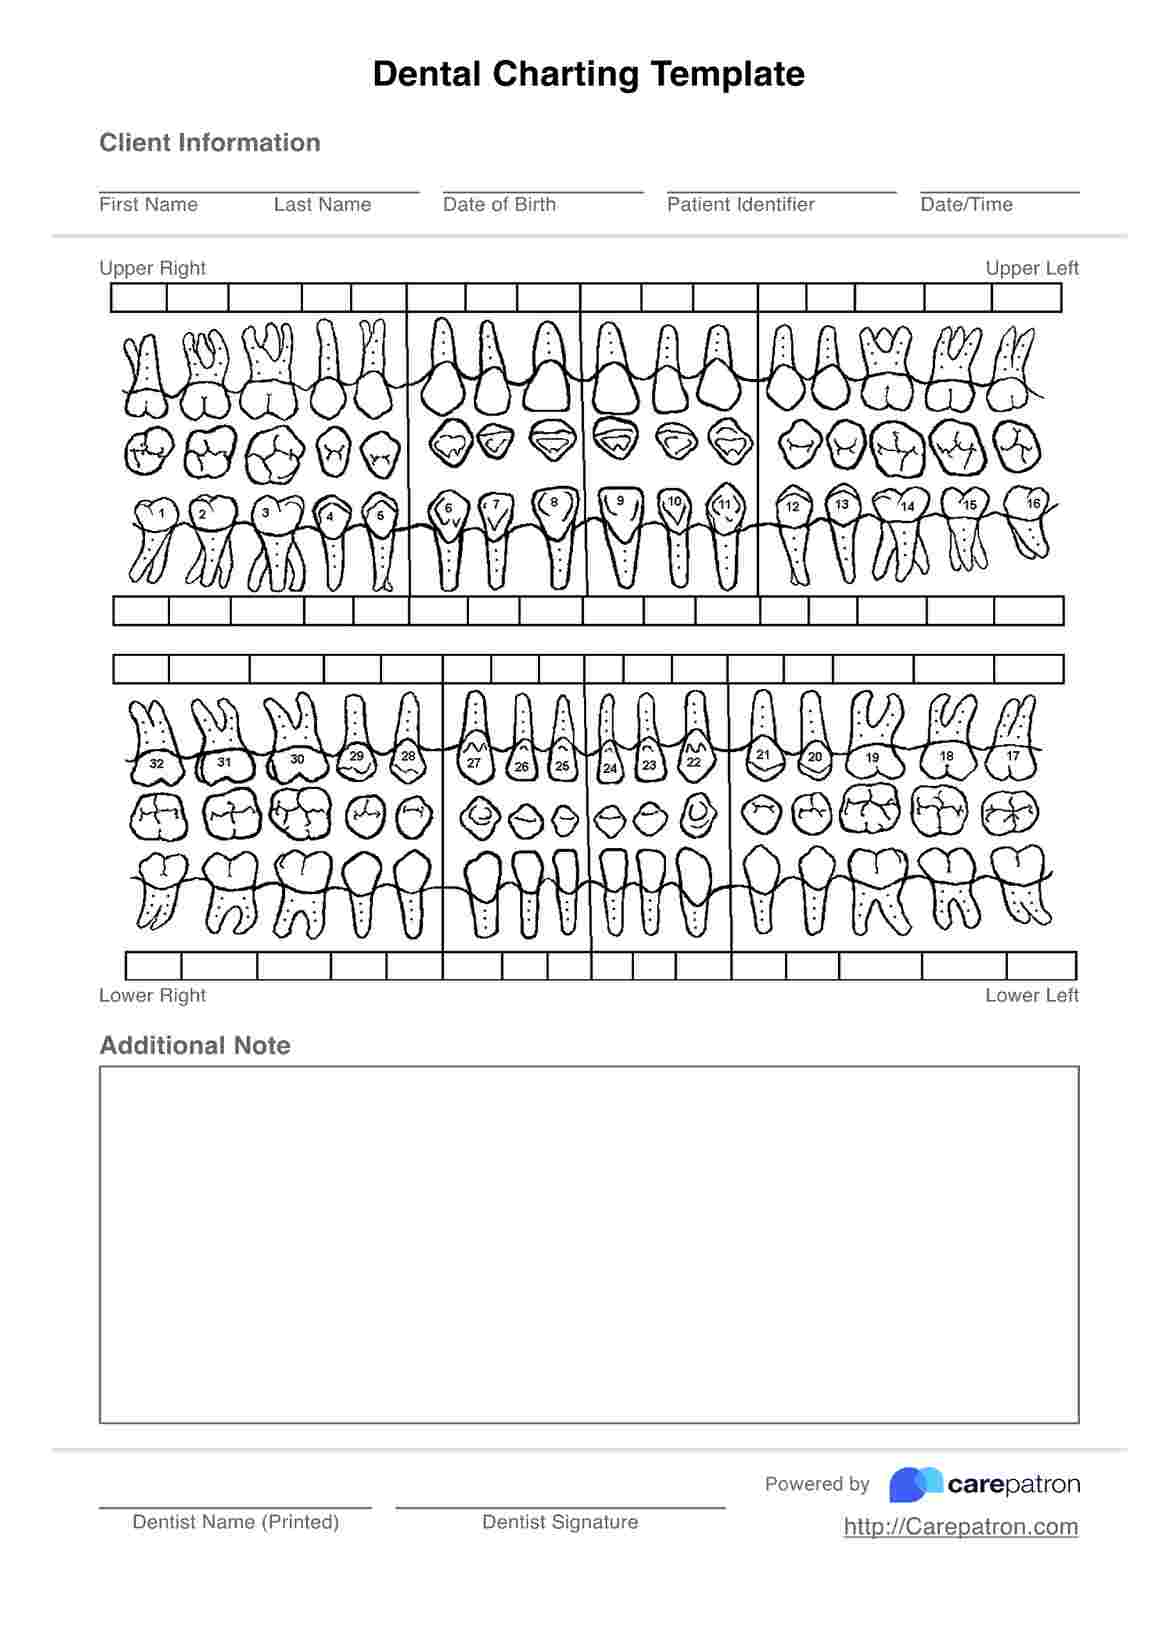 Dental Charting Template PDF Example